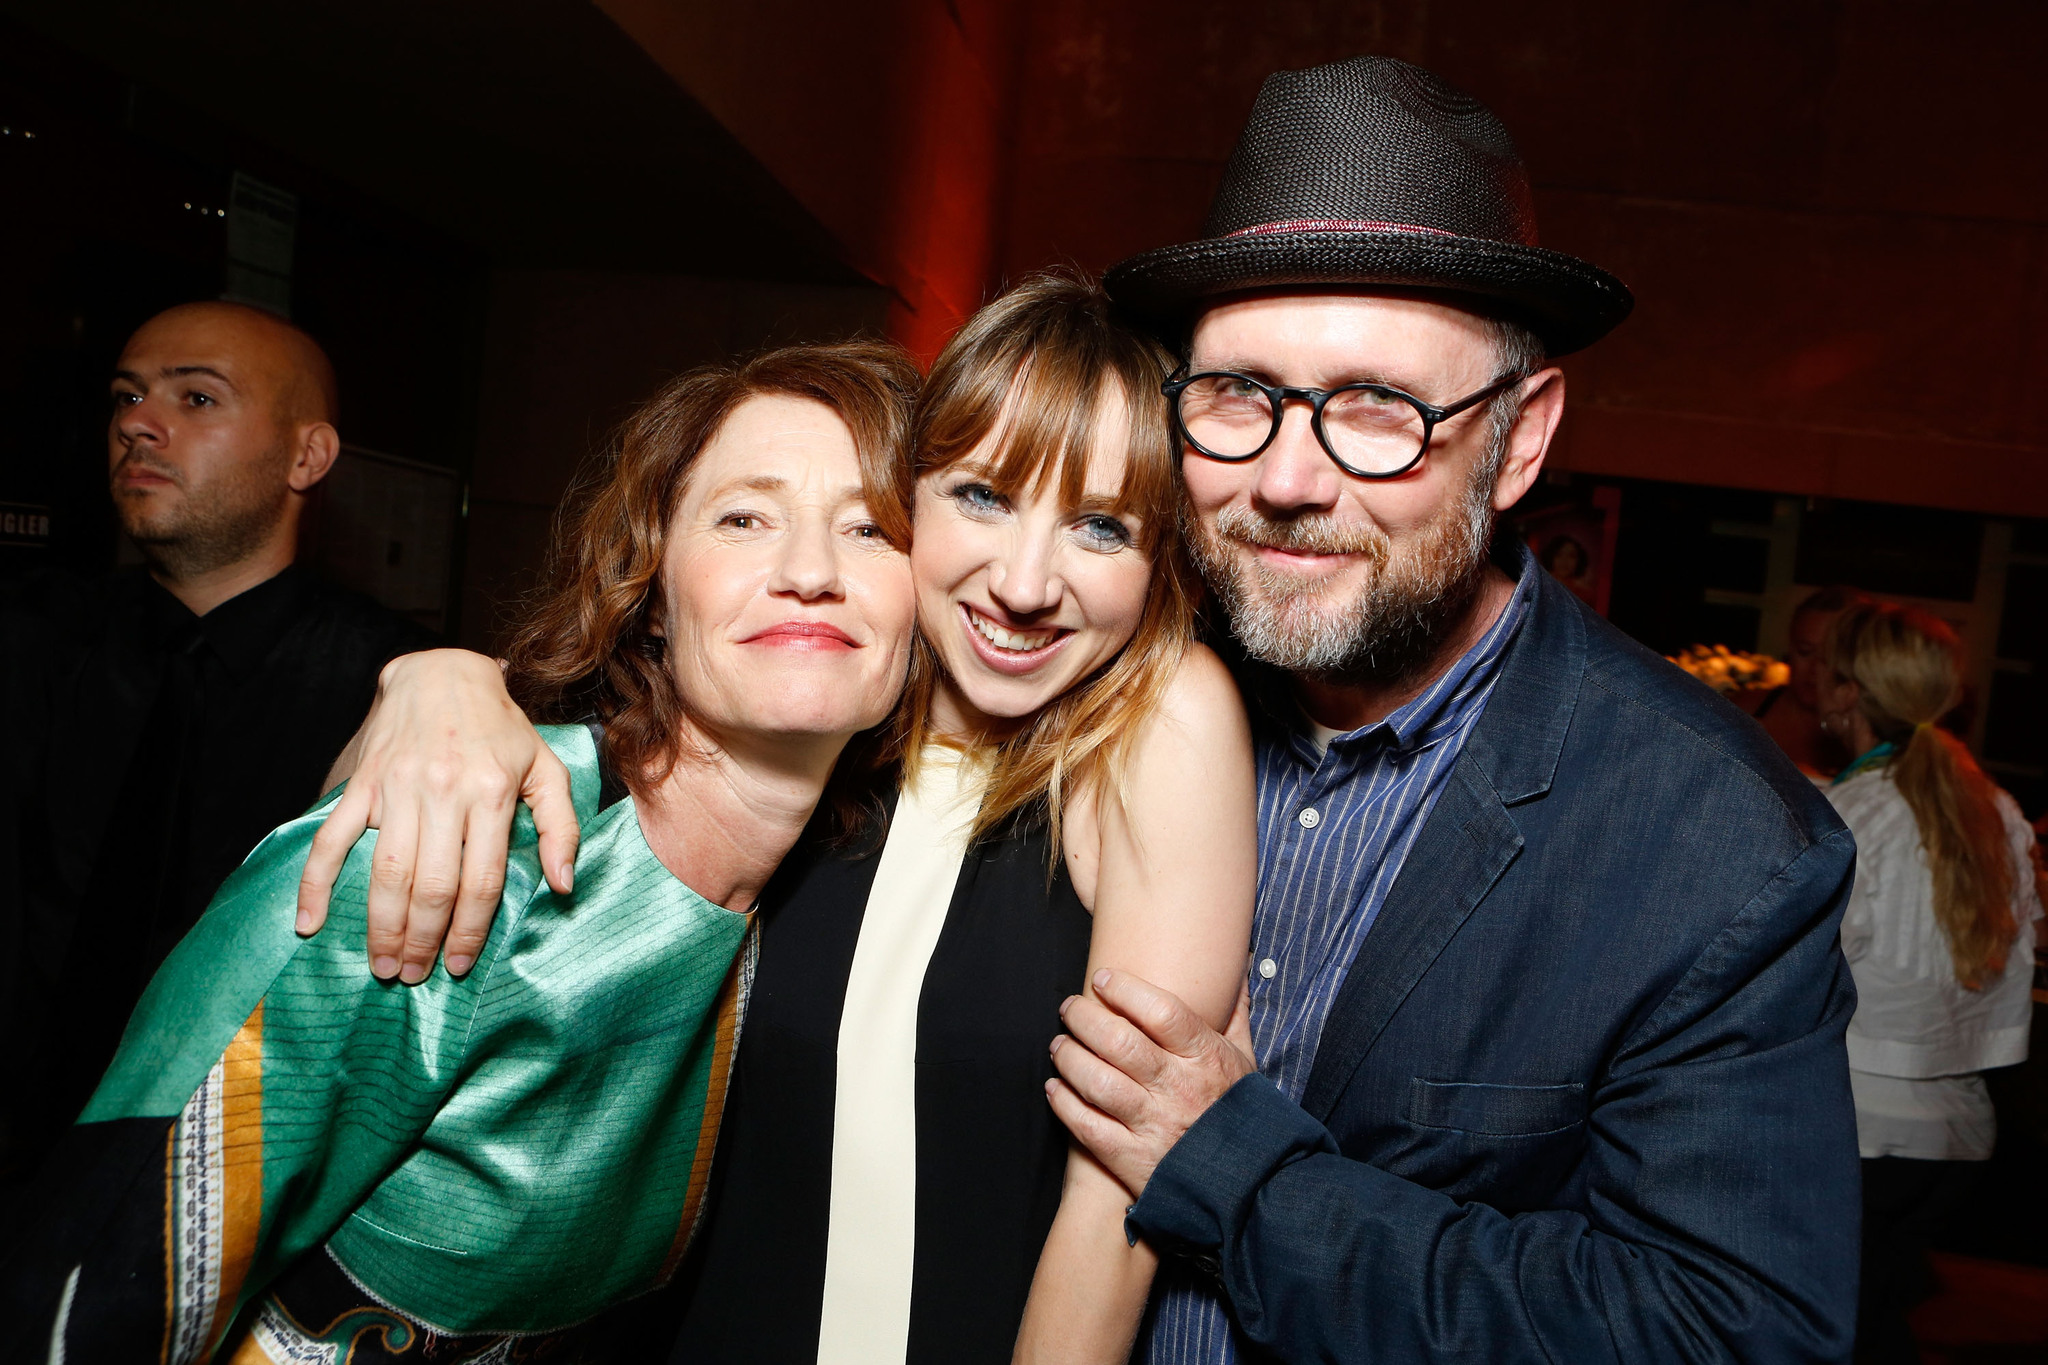 Jonathan Dayton, Valerie Faris and Zoe Grace at event of Rube Sparks (2012)